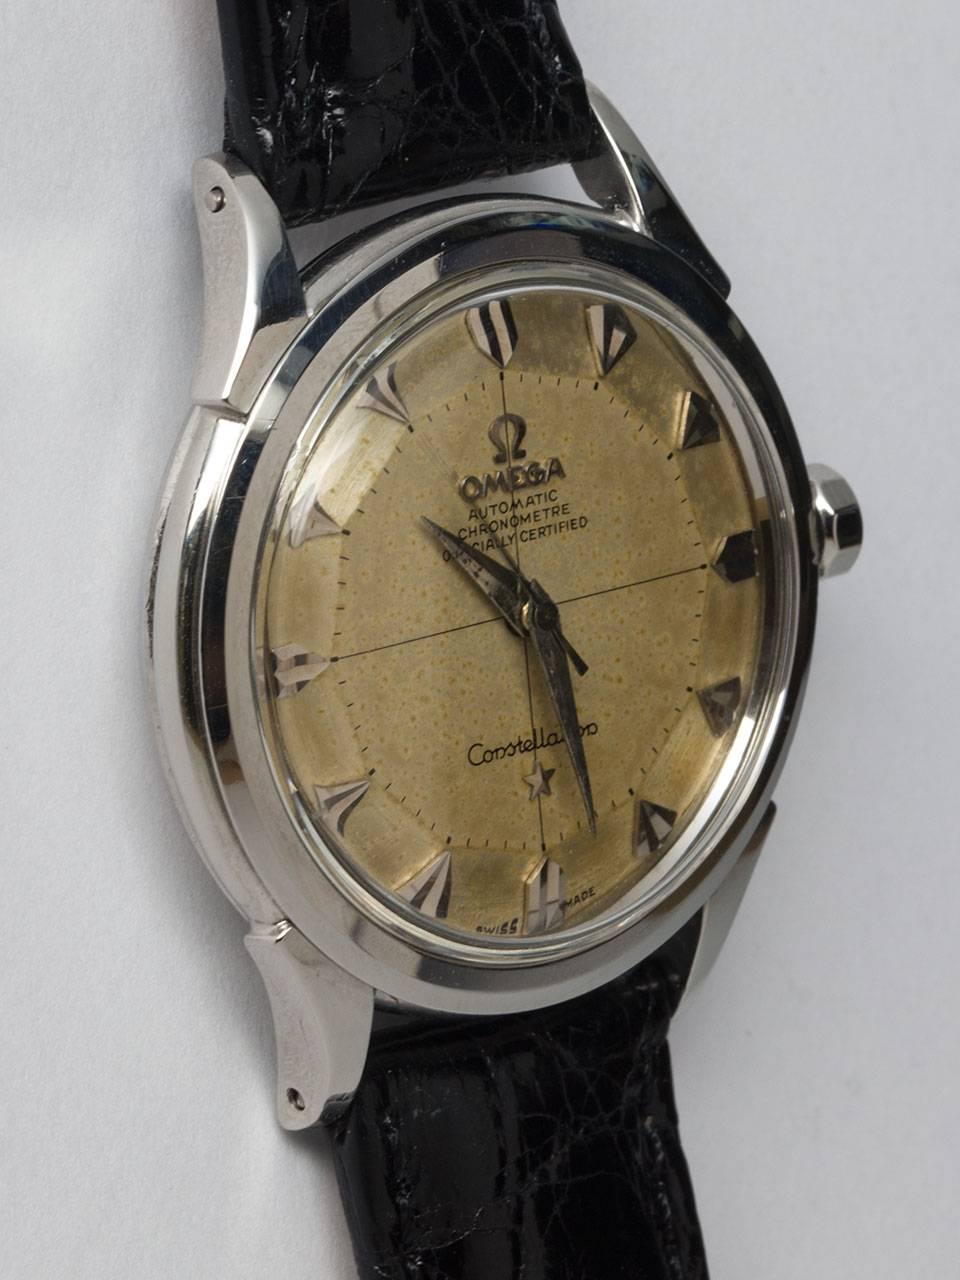 Omega Stainless Steel Constellation ref 2852 circa 1958. 35 x 42mm heavy snap back case with deeply embossed gold Observatory plaque. Pleasing original patina’d matte silvered pie pan dial with large flared silver indexes and tapered silver sword